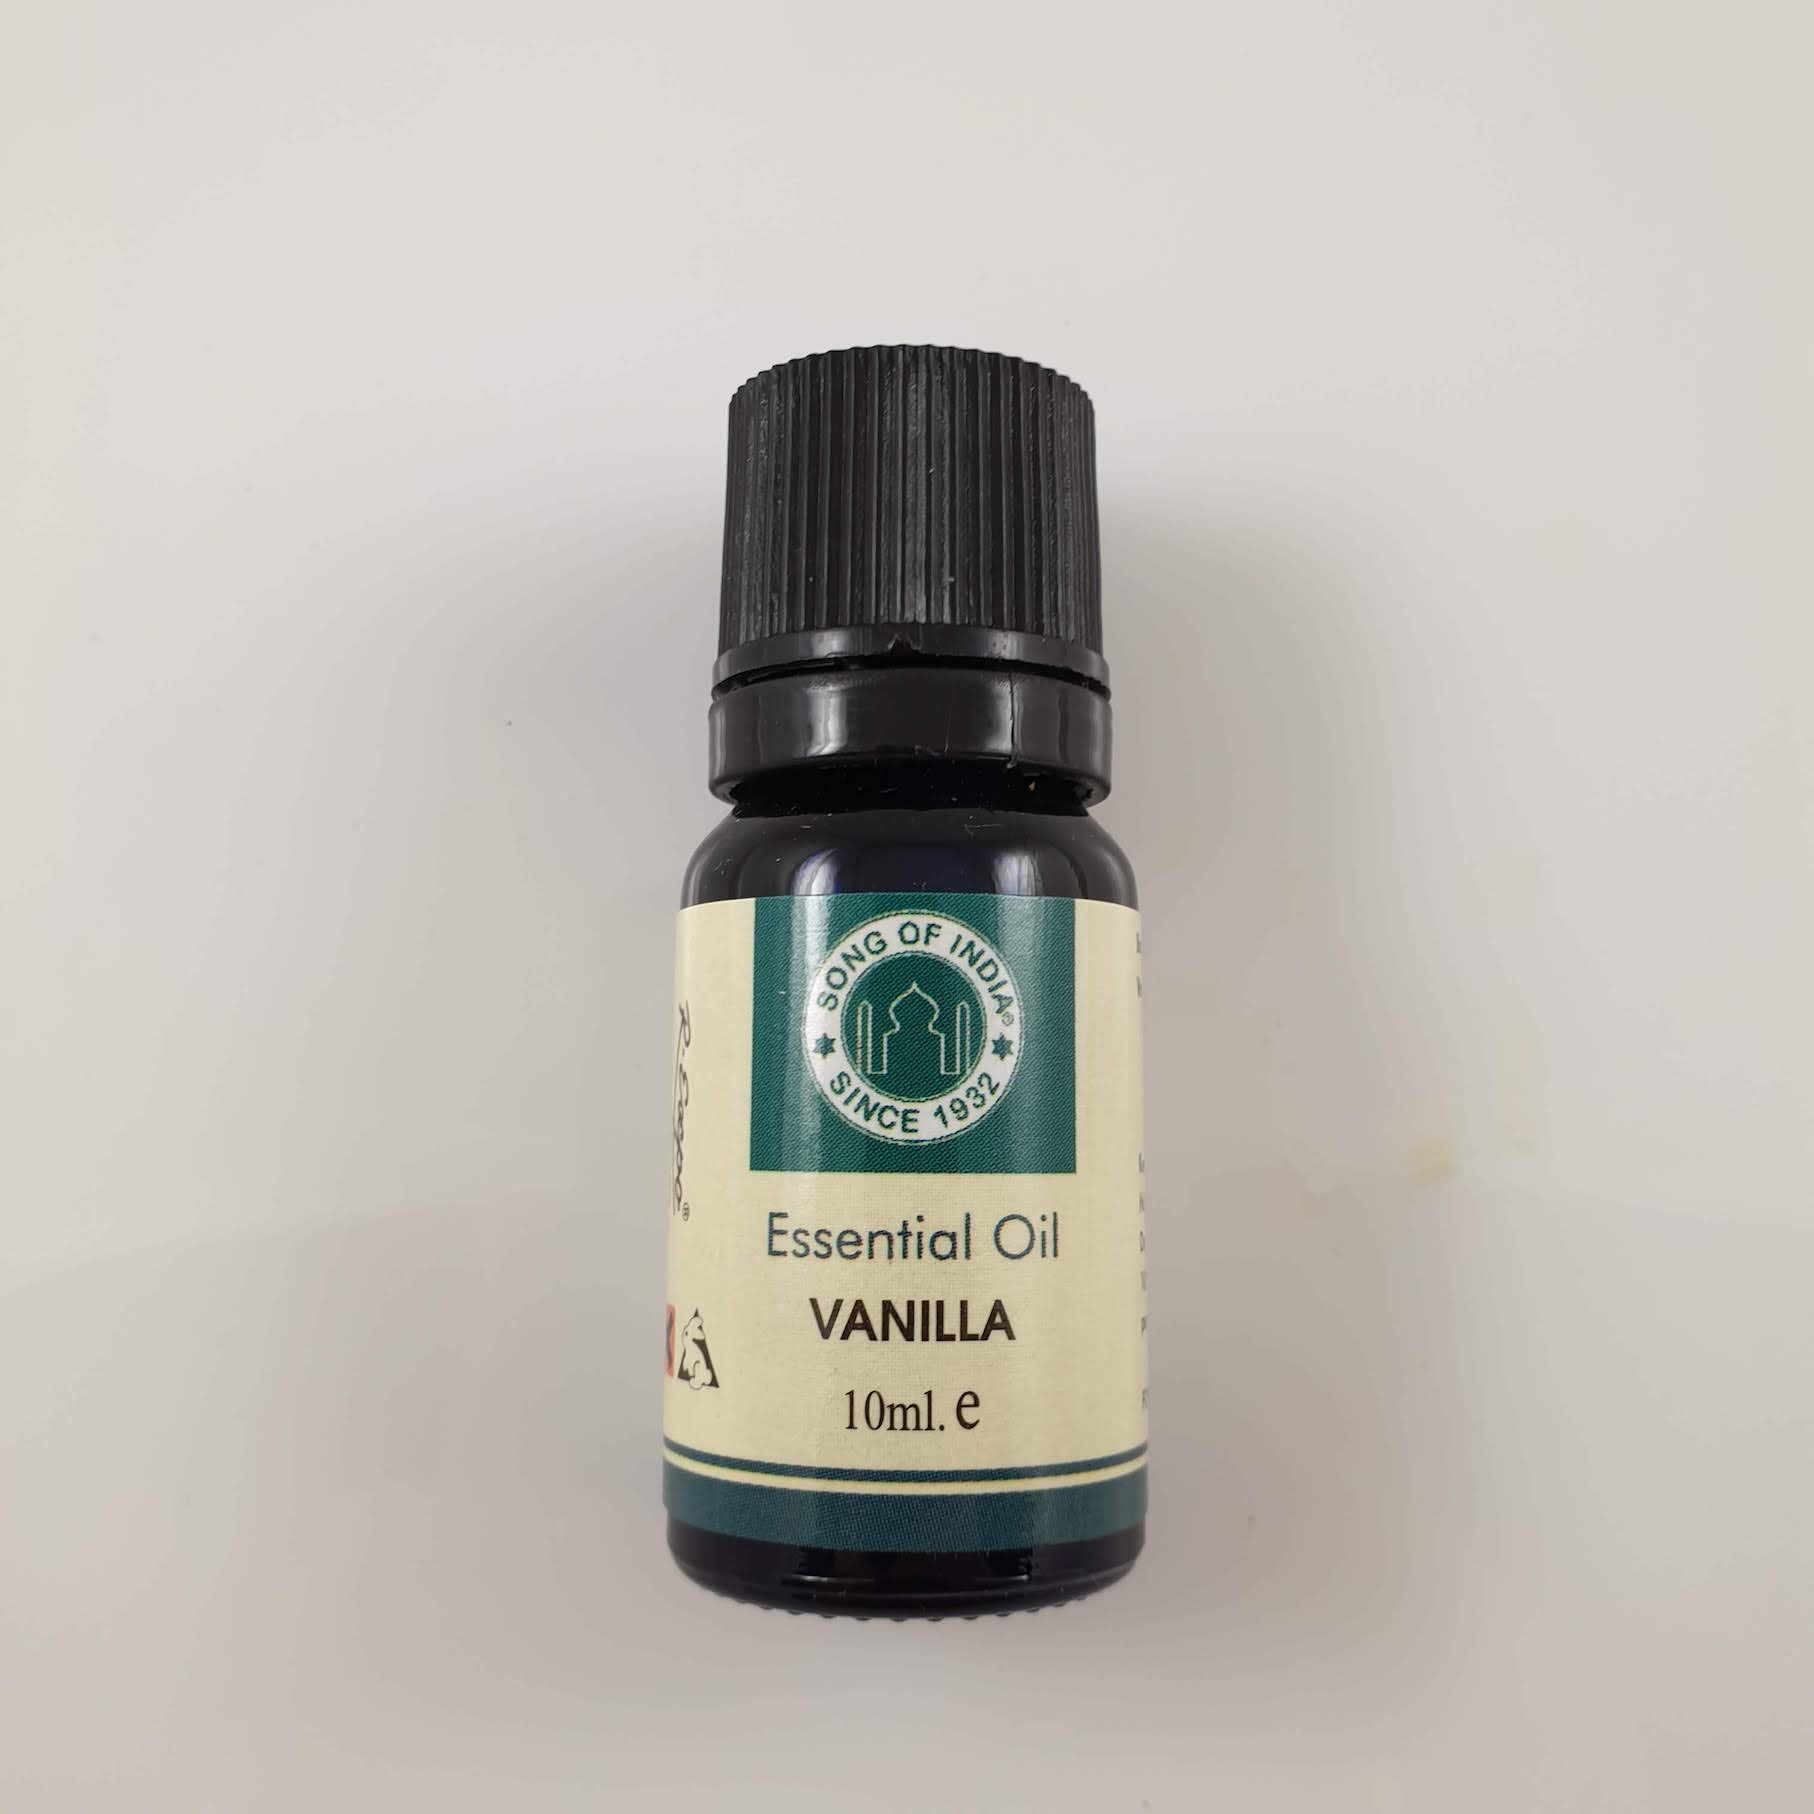 Song of India Essential Oil - Vanilla 10ml - Rivendell Shop